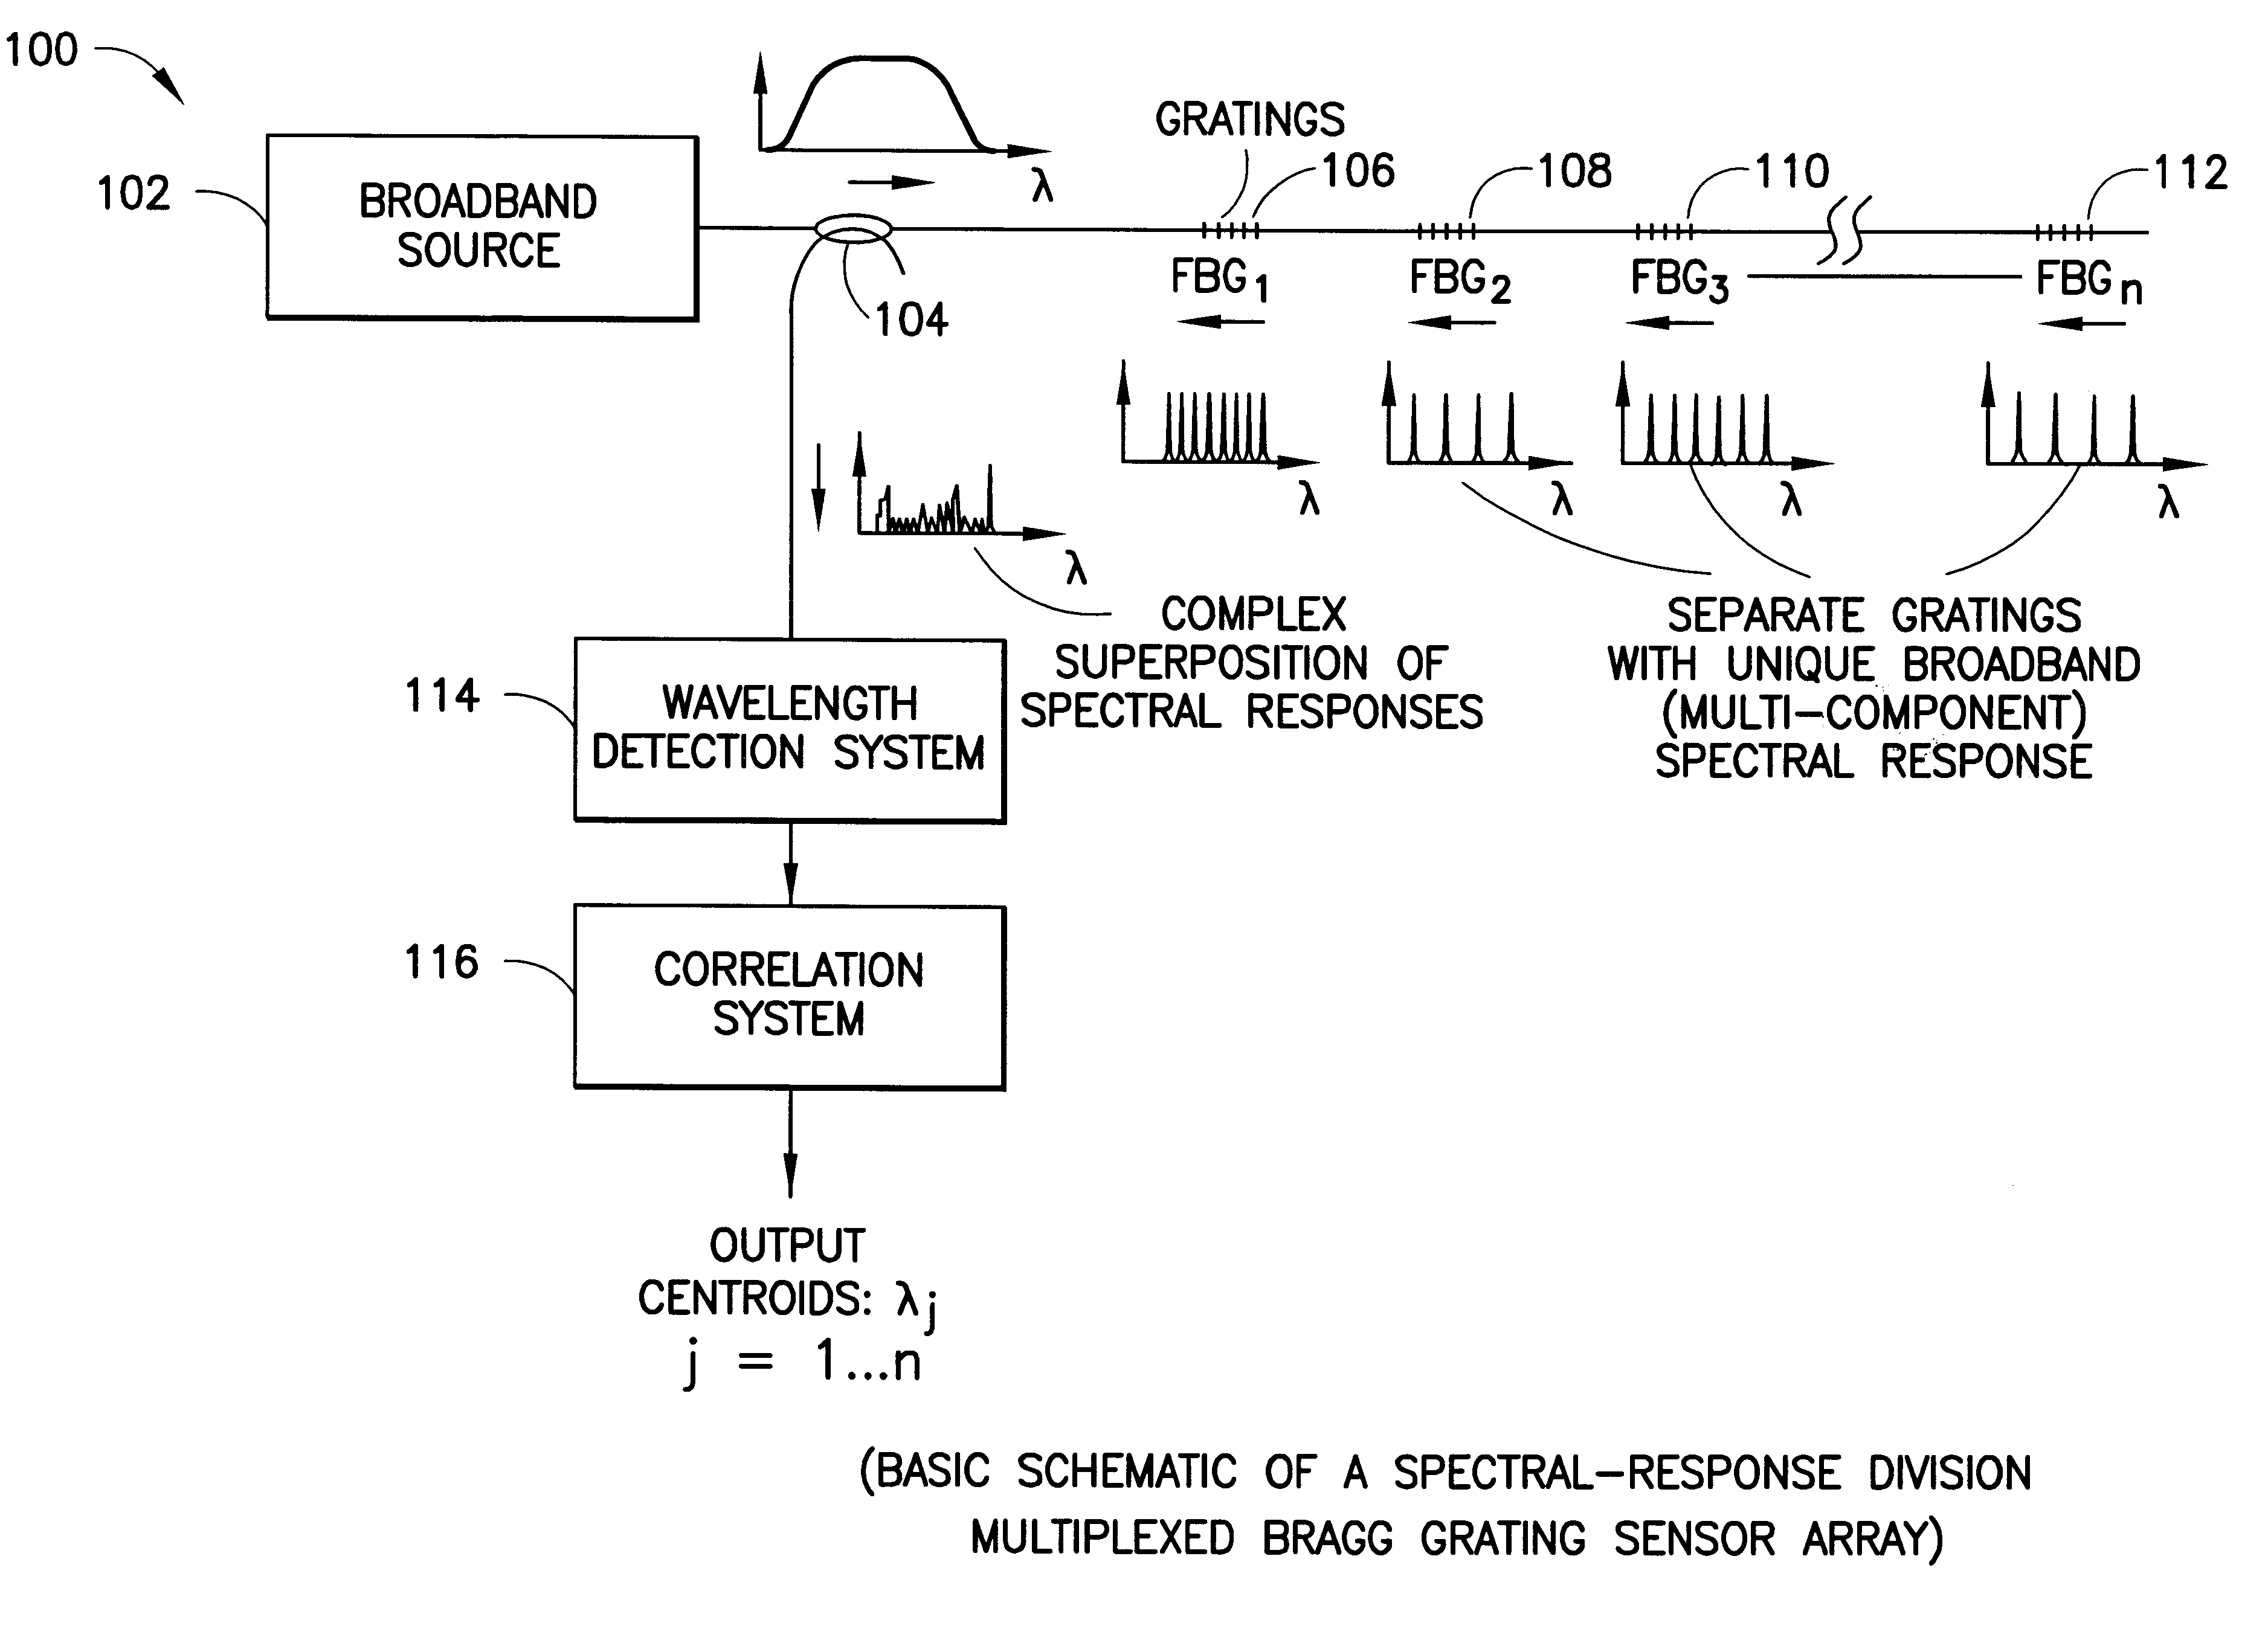 Bragg grating sensor system with spectral response or code division multiplexing